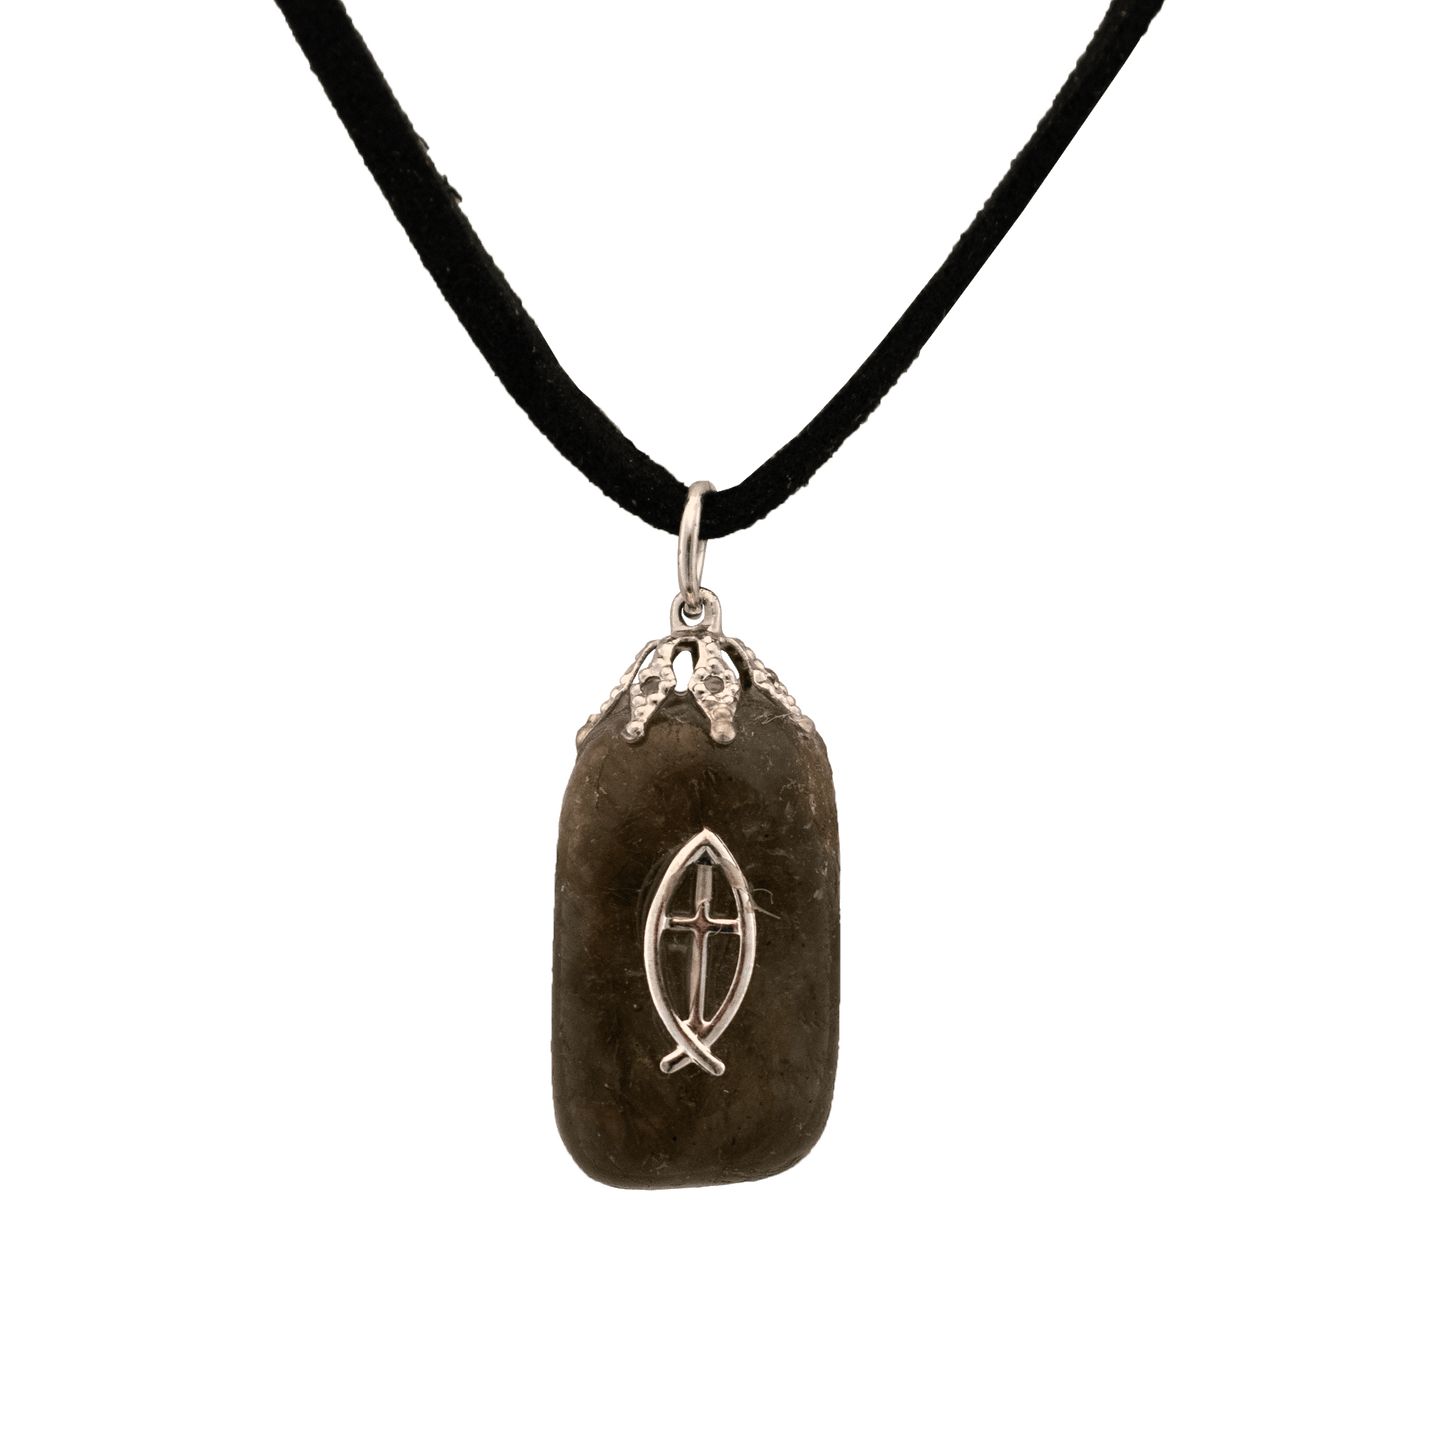 Agate rectangle pendant with Ichthus symbol in the center on a black cord